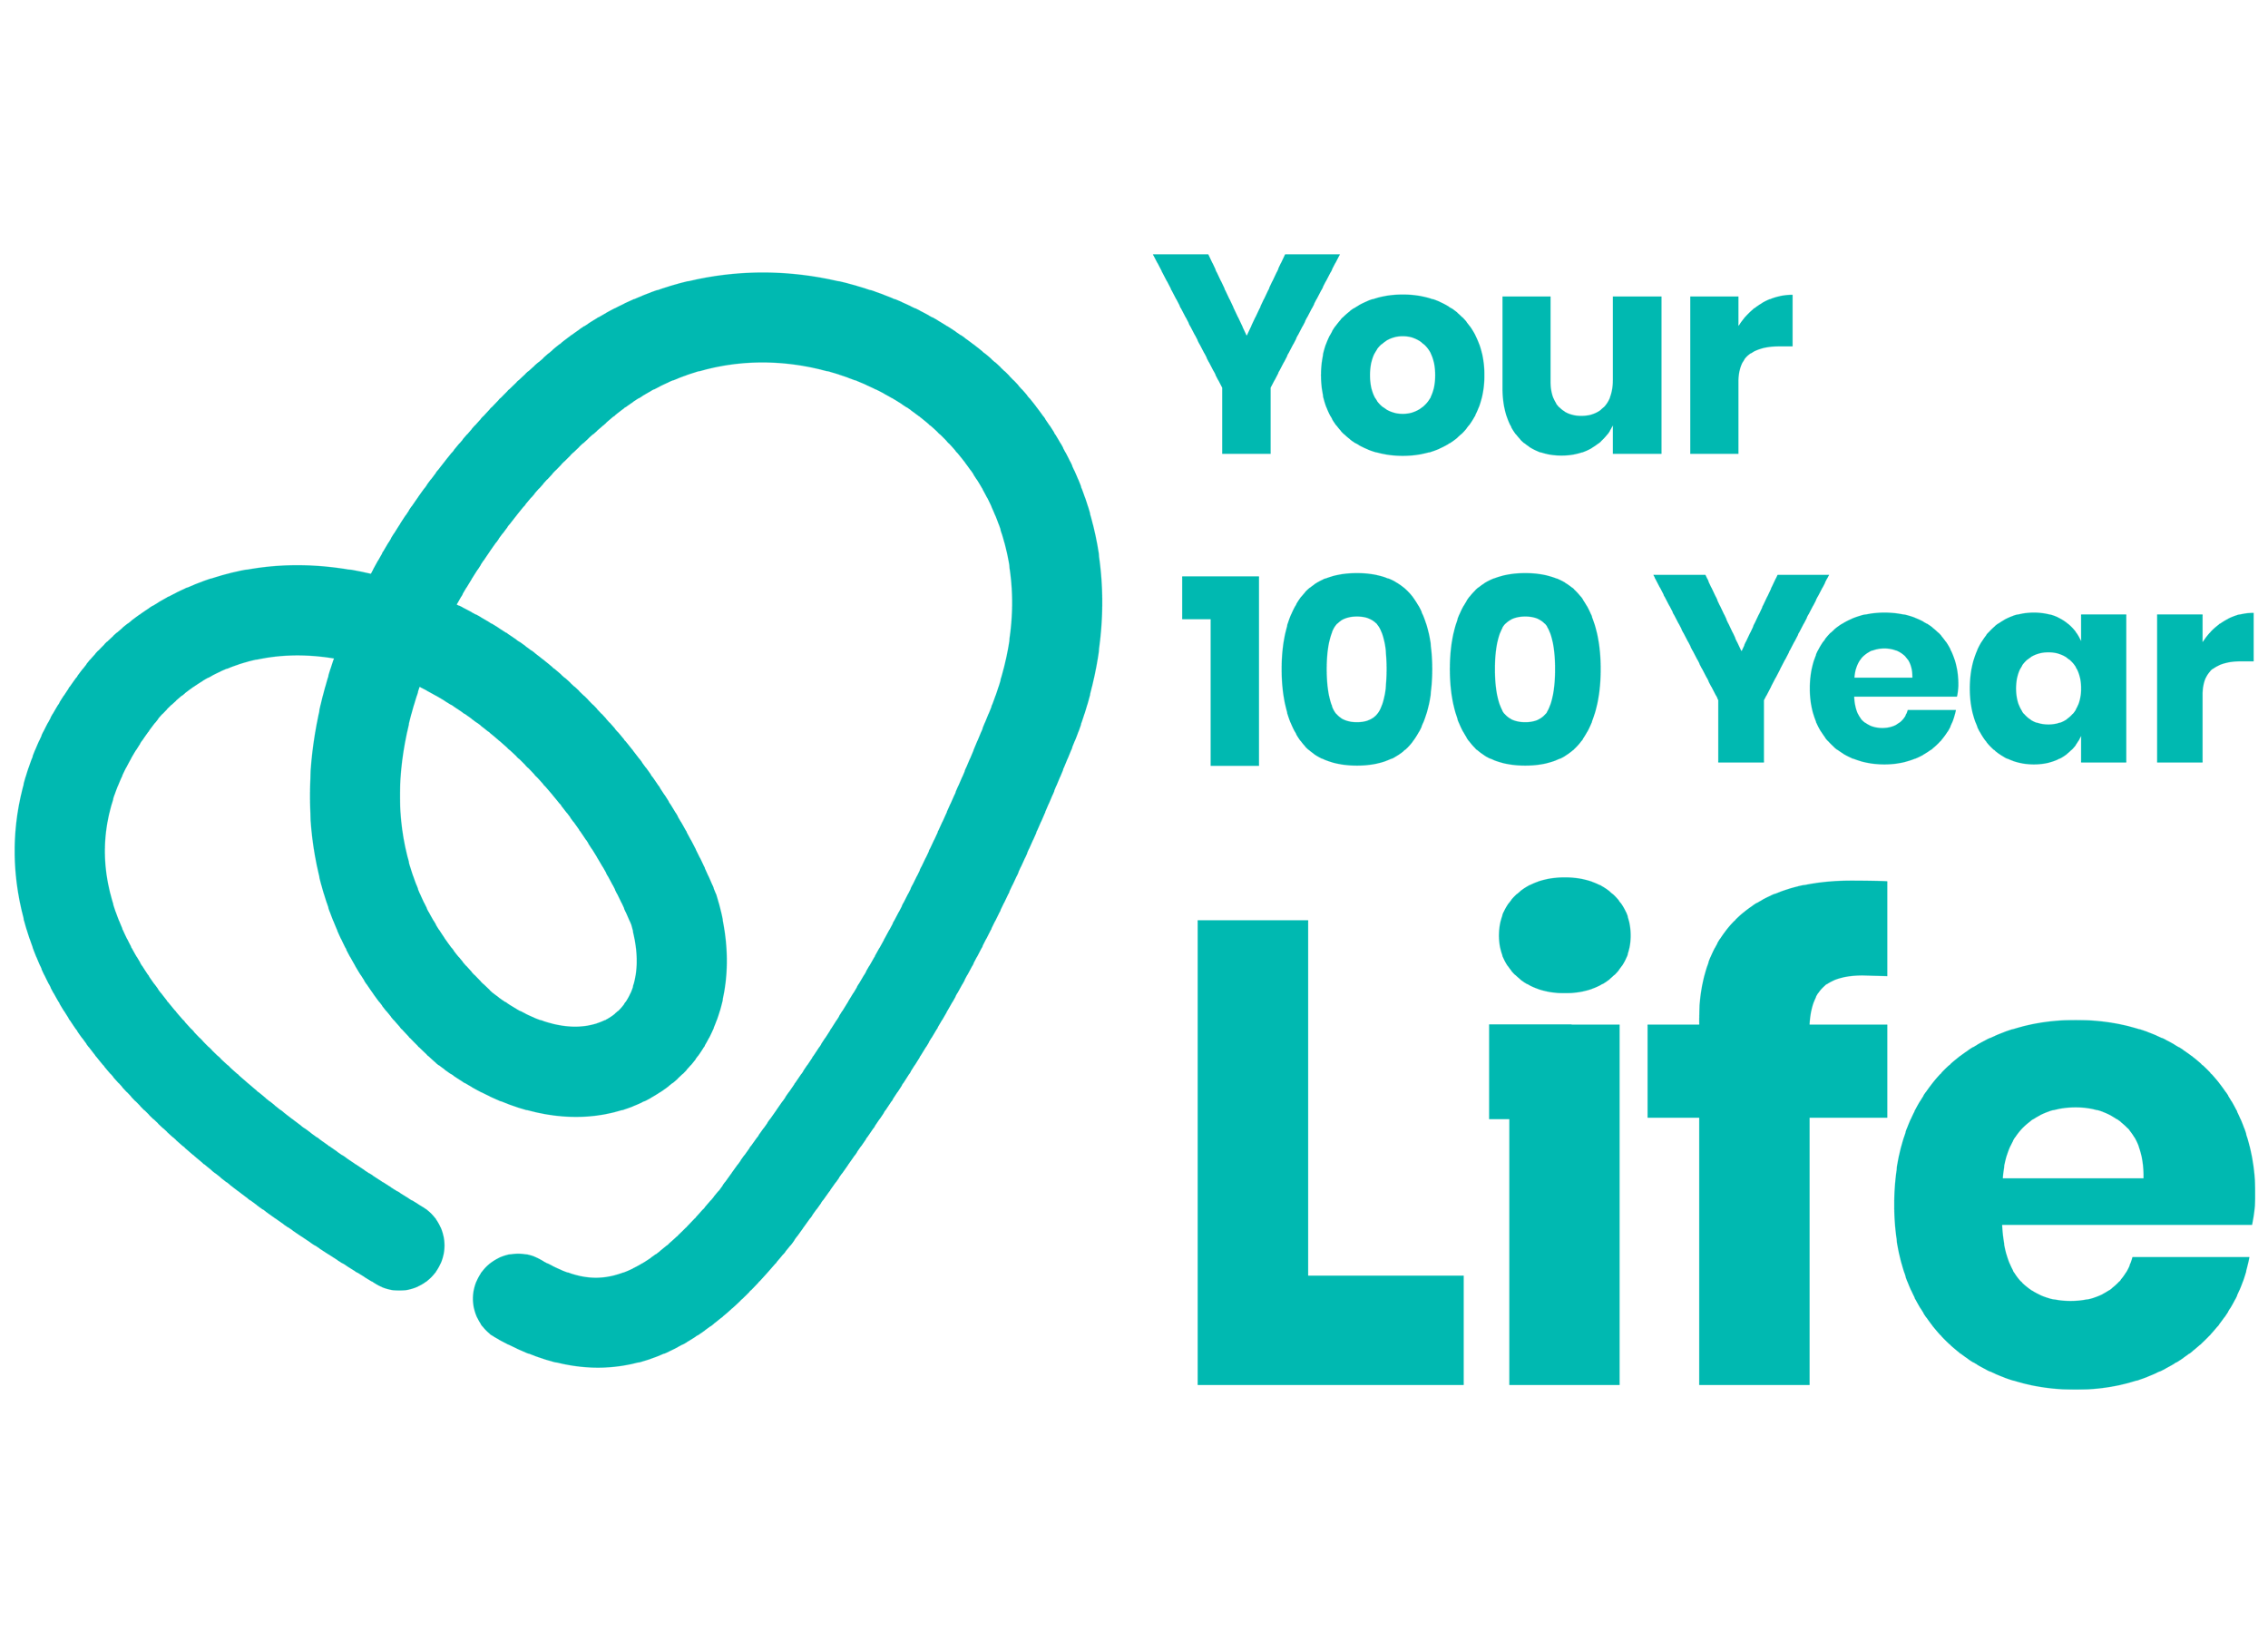 Your 100 Year Life